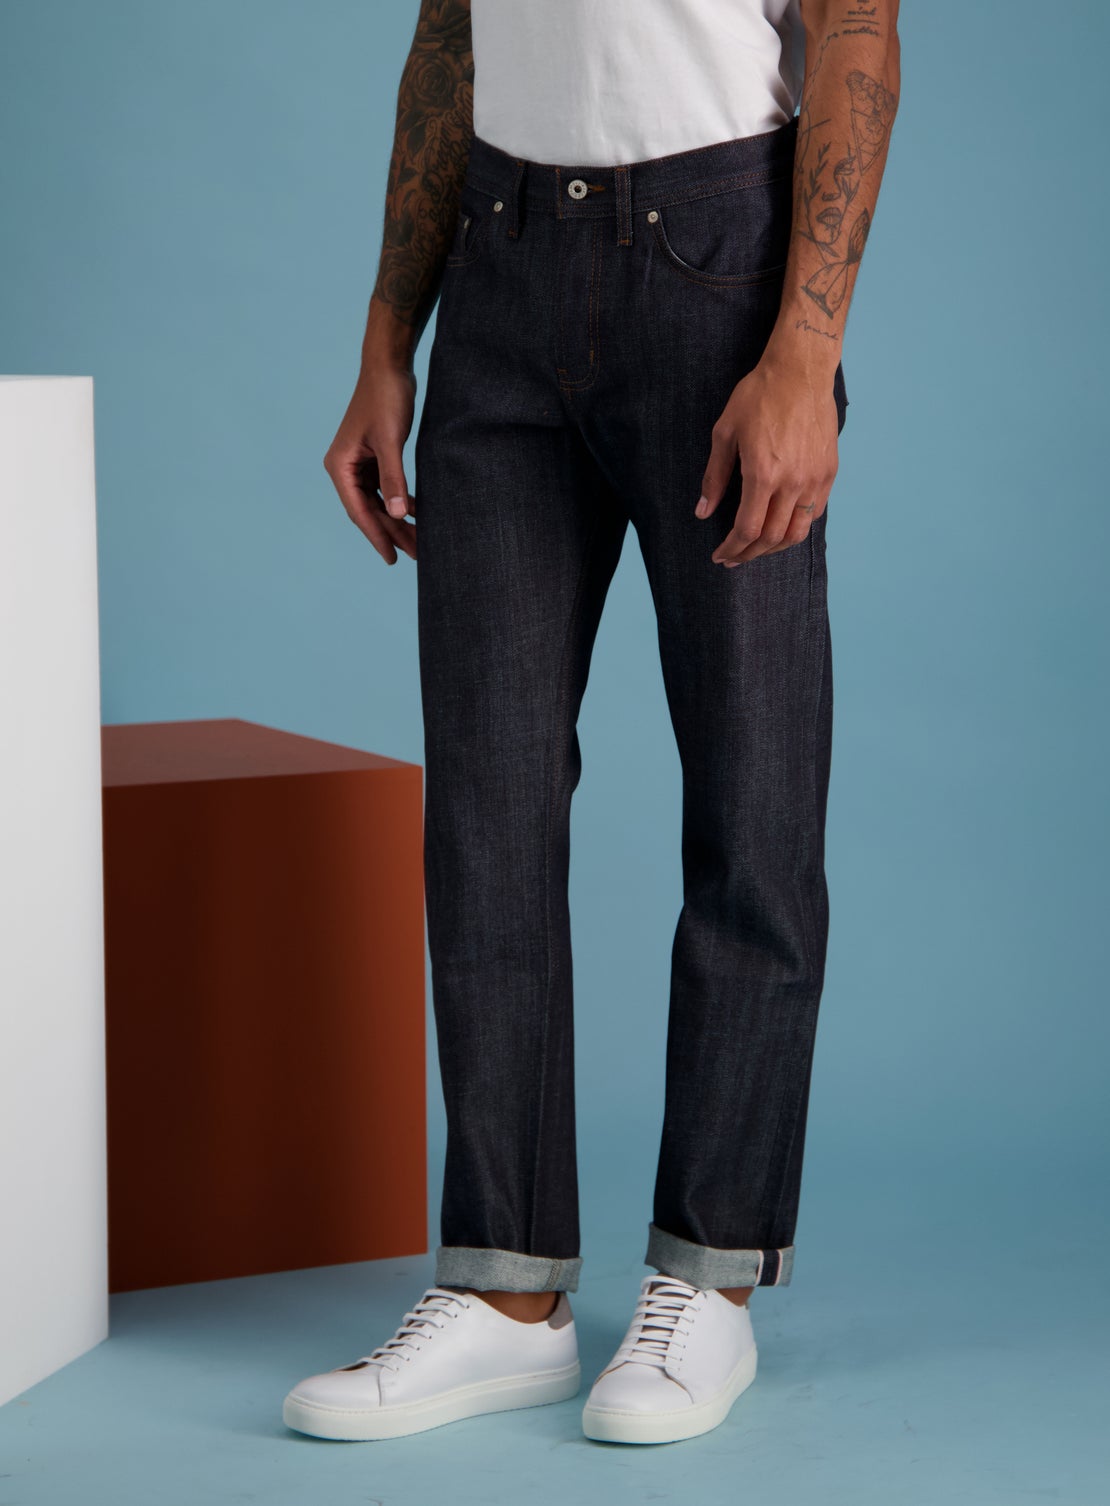 Naked & Famous Weird Guy - Stretch Selvedge